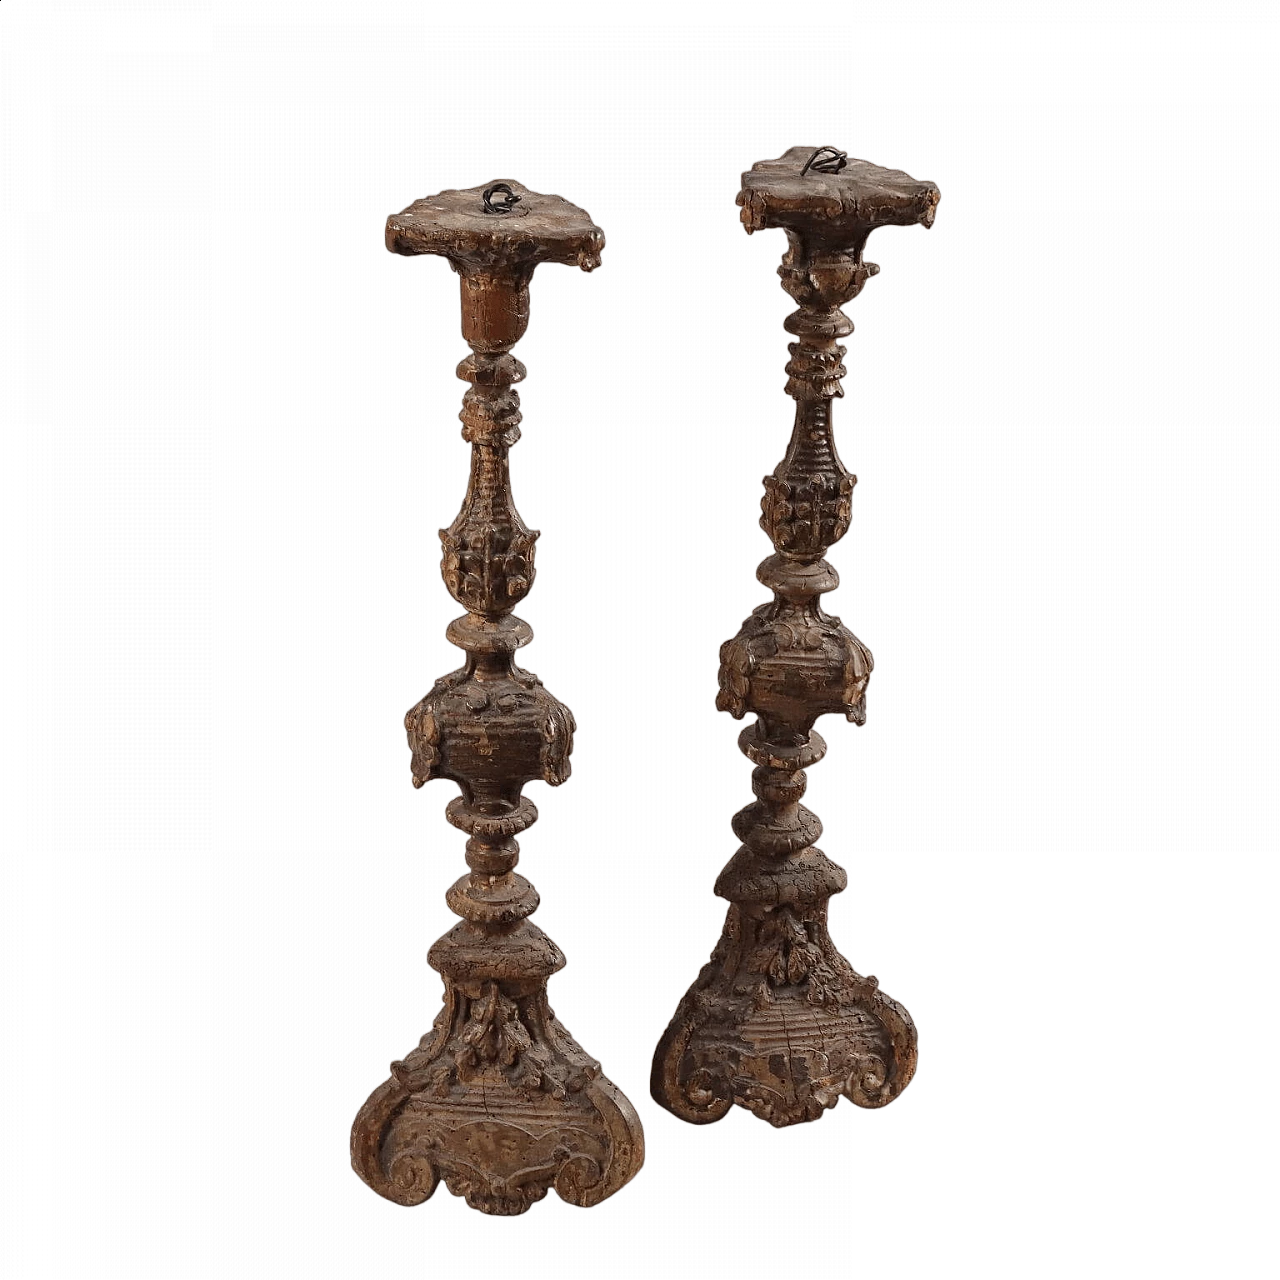 Pair of Neoclassical carved and lacquered wood torch holders, late 18th century 11